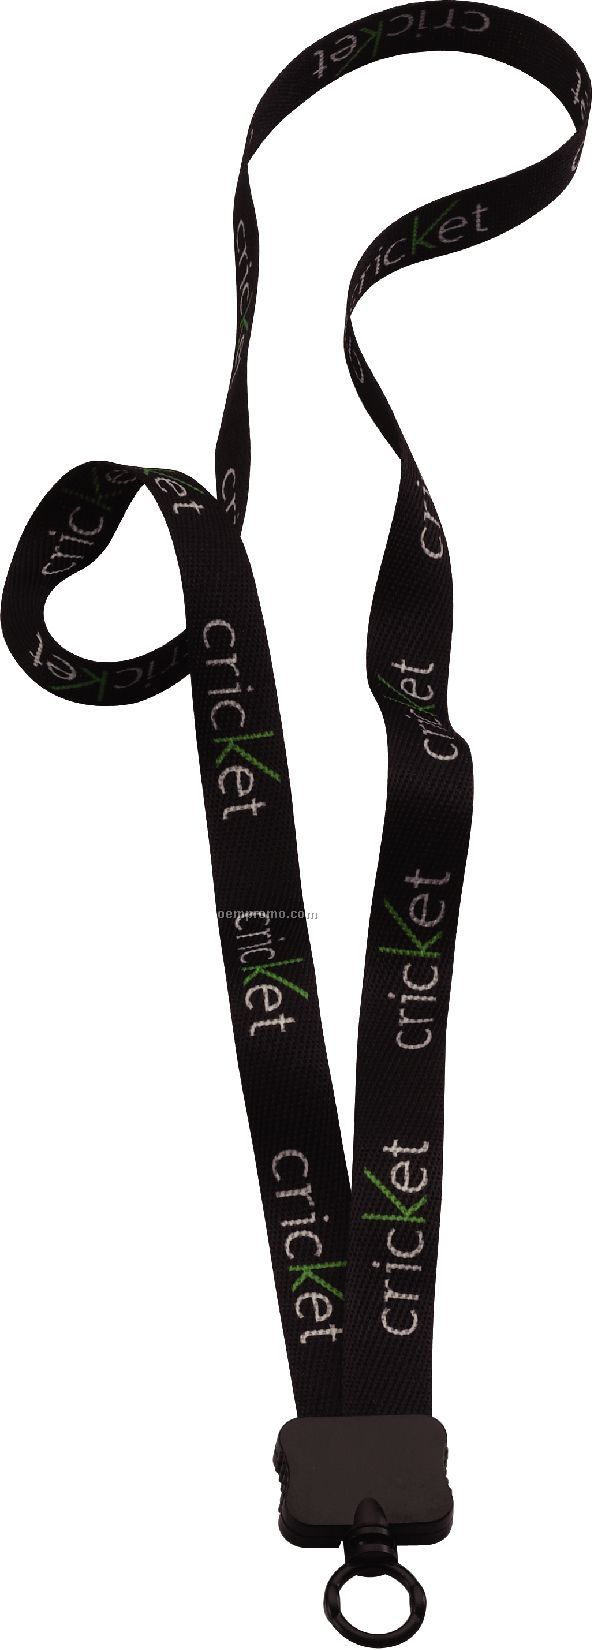 3/4" Rpet Waffle Weave Dye Sublimated Lanyard W/ Plastic Clamshell & O-ring